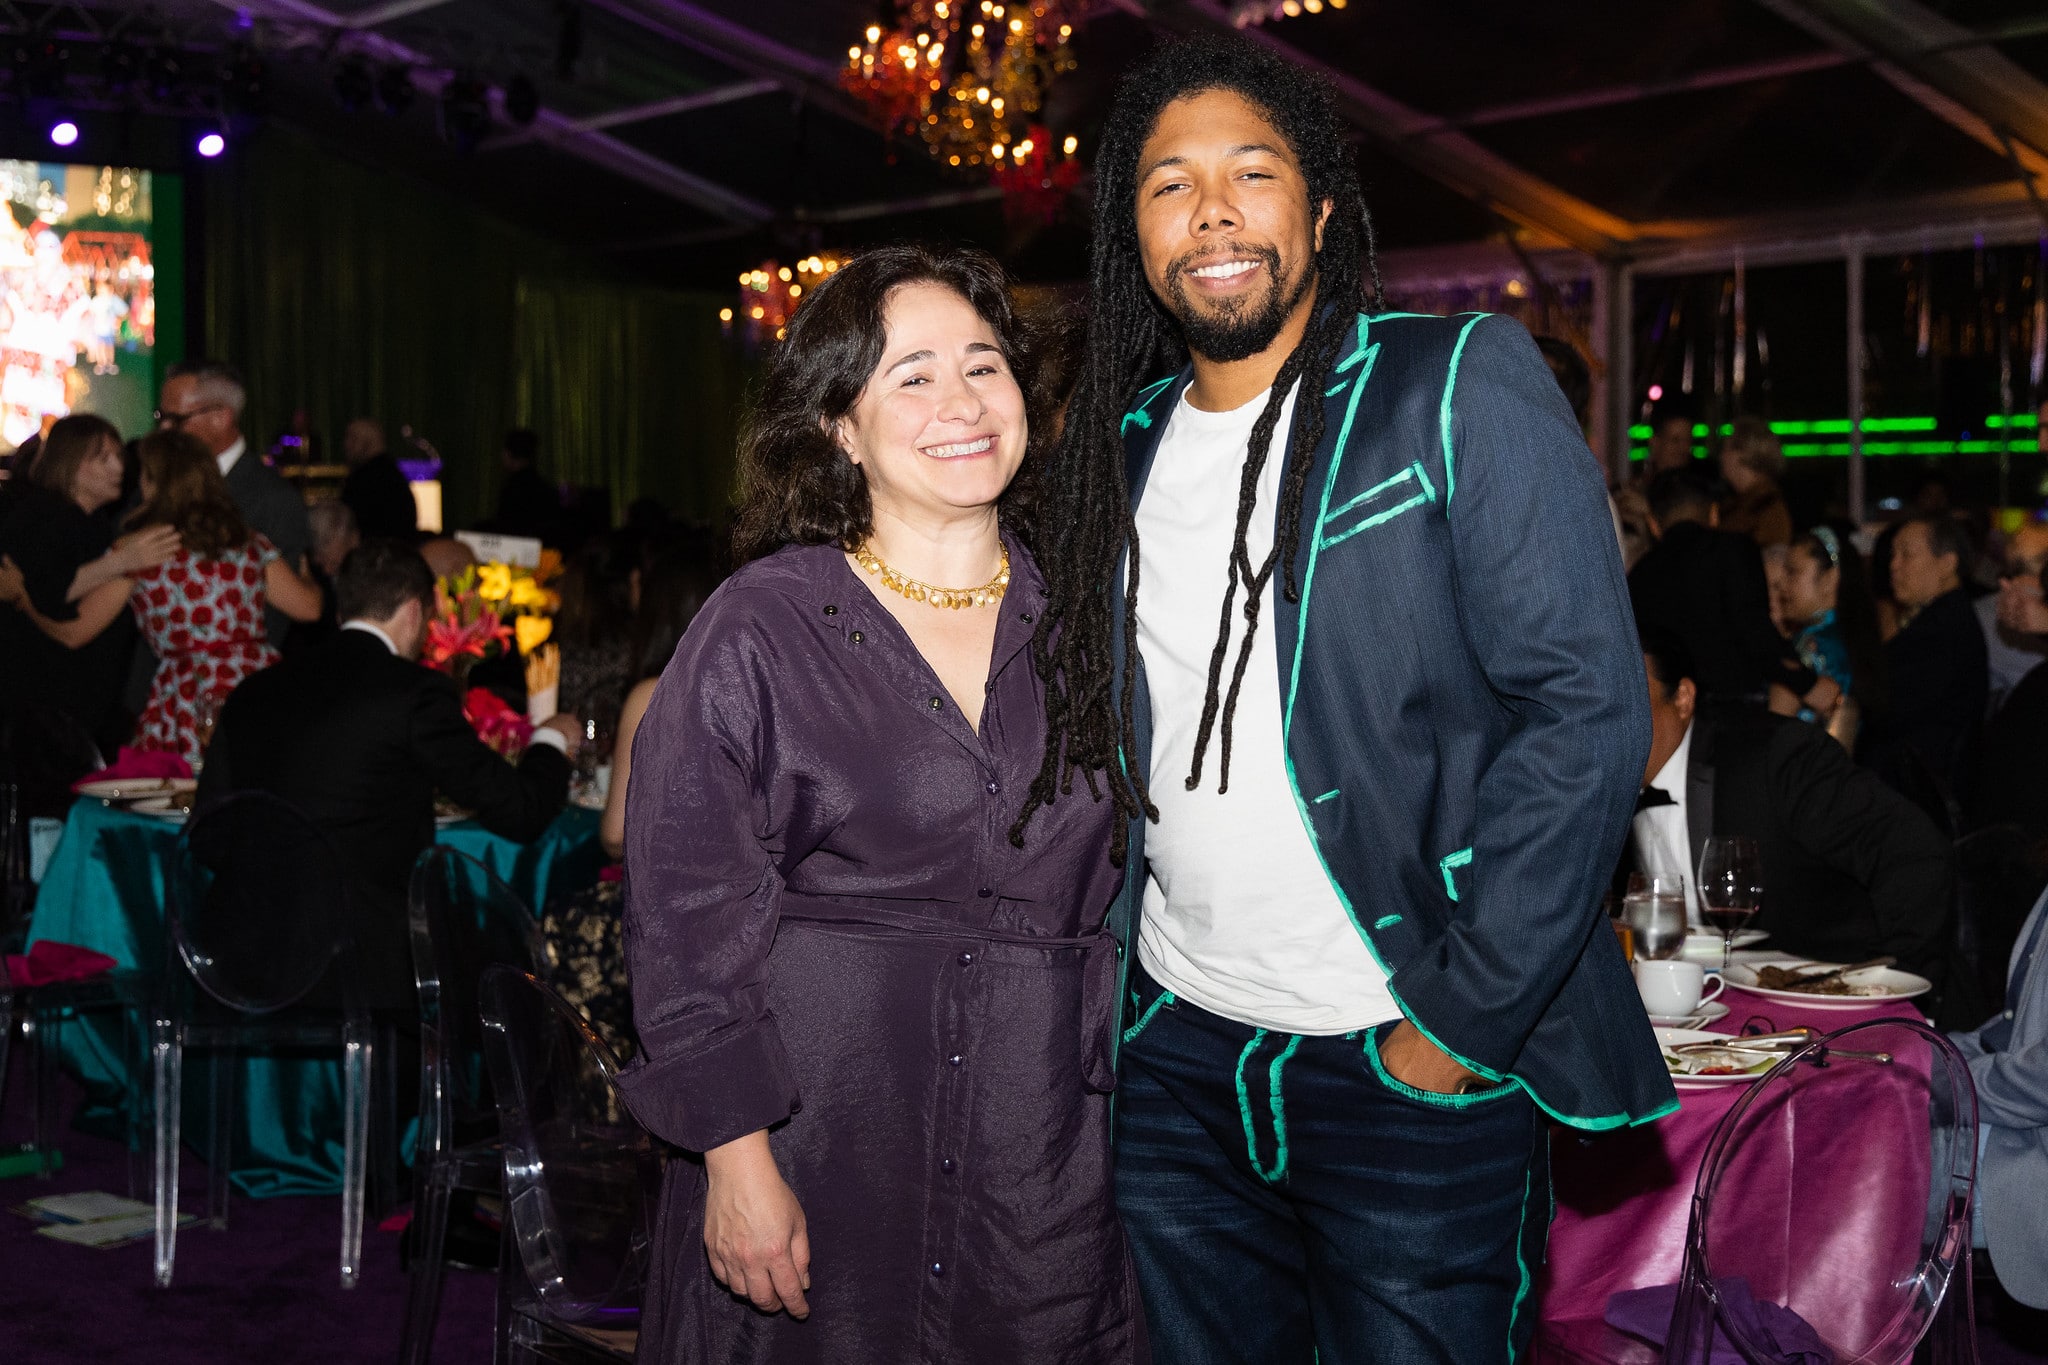 From L-R: Anne-Marie Tcholakian, James Pendleton  Gala on the Green® at Discovery Green in downtown Houston. February 23, 2023. Photo: Lawrence Elizabeth Knox